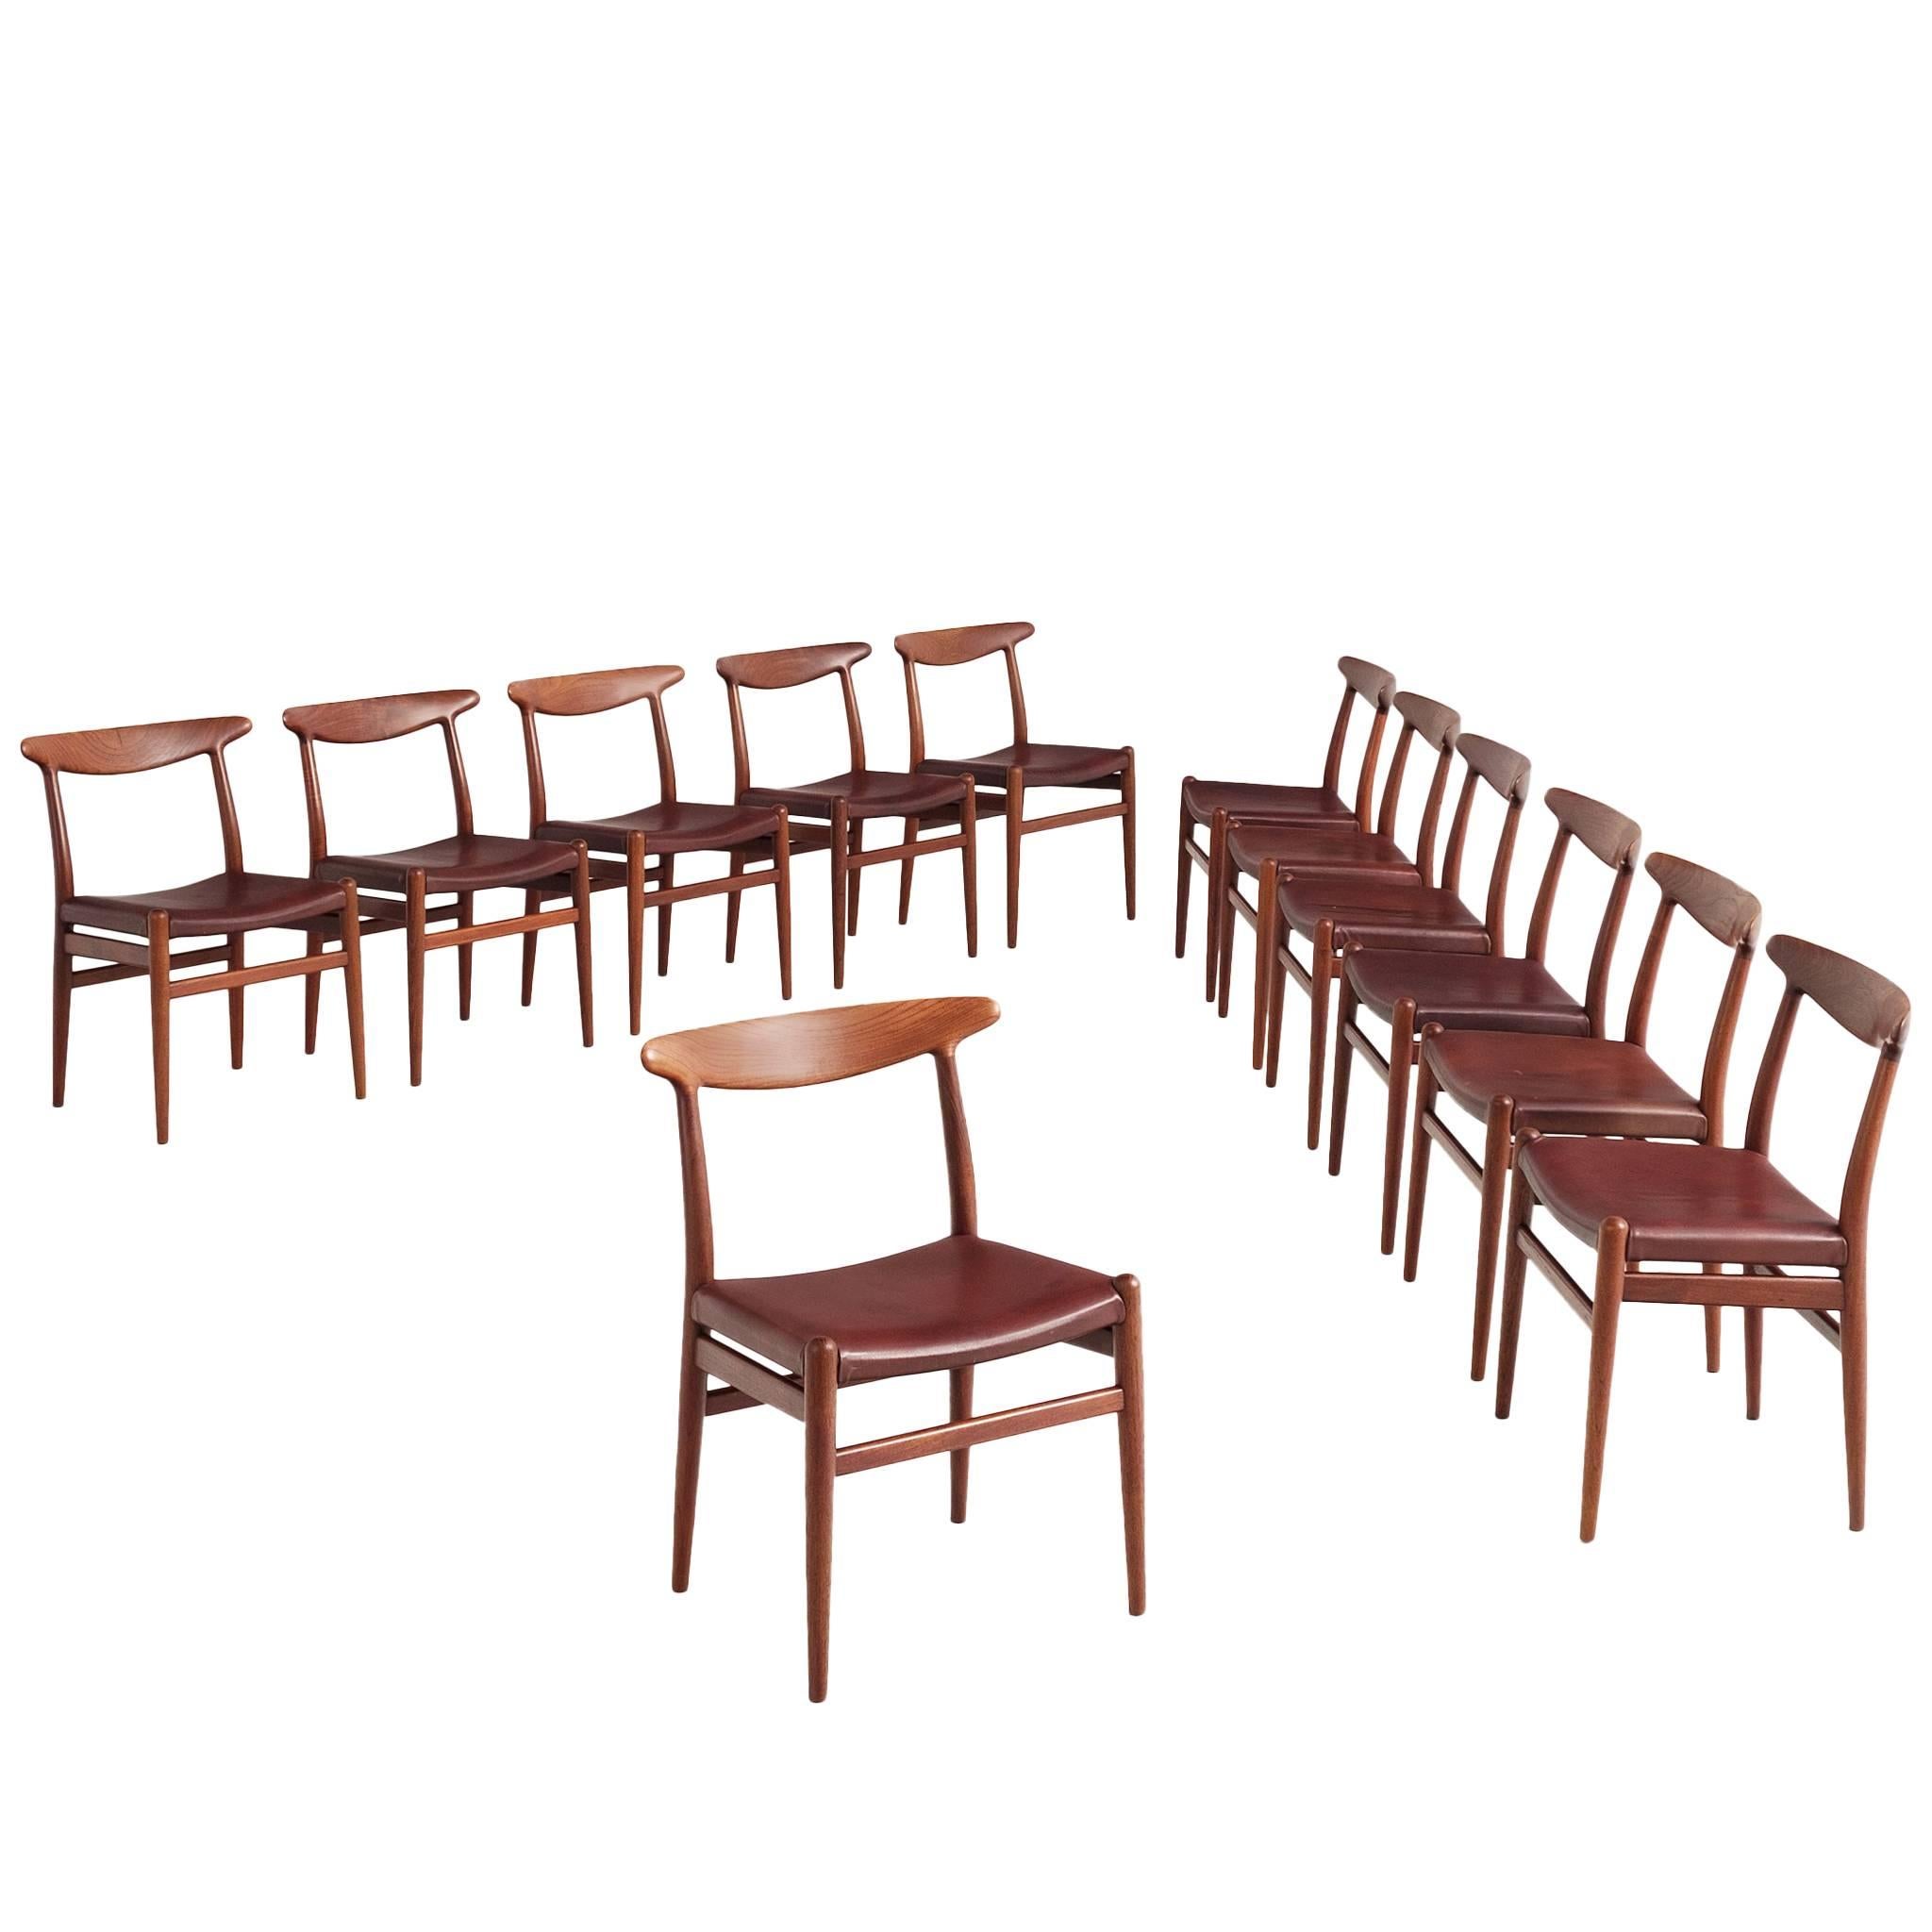 Early Set of 12 Hans J. Wegner Chairs with Original Leather